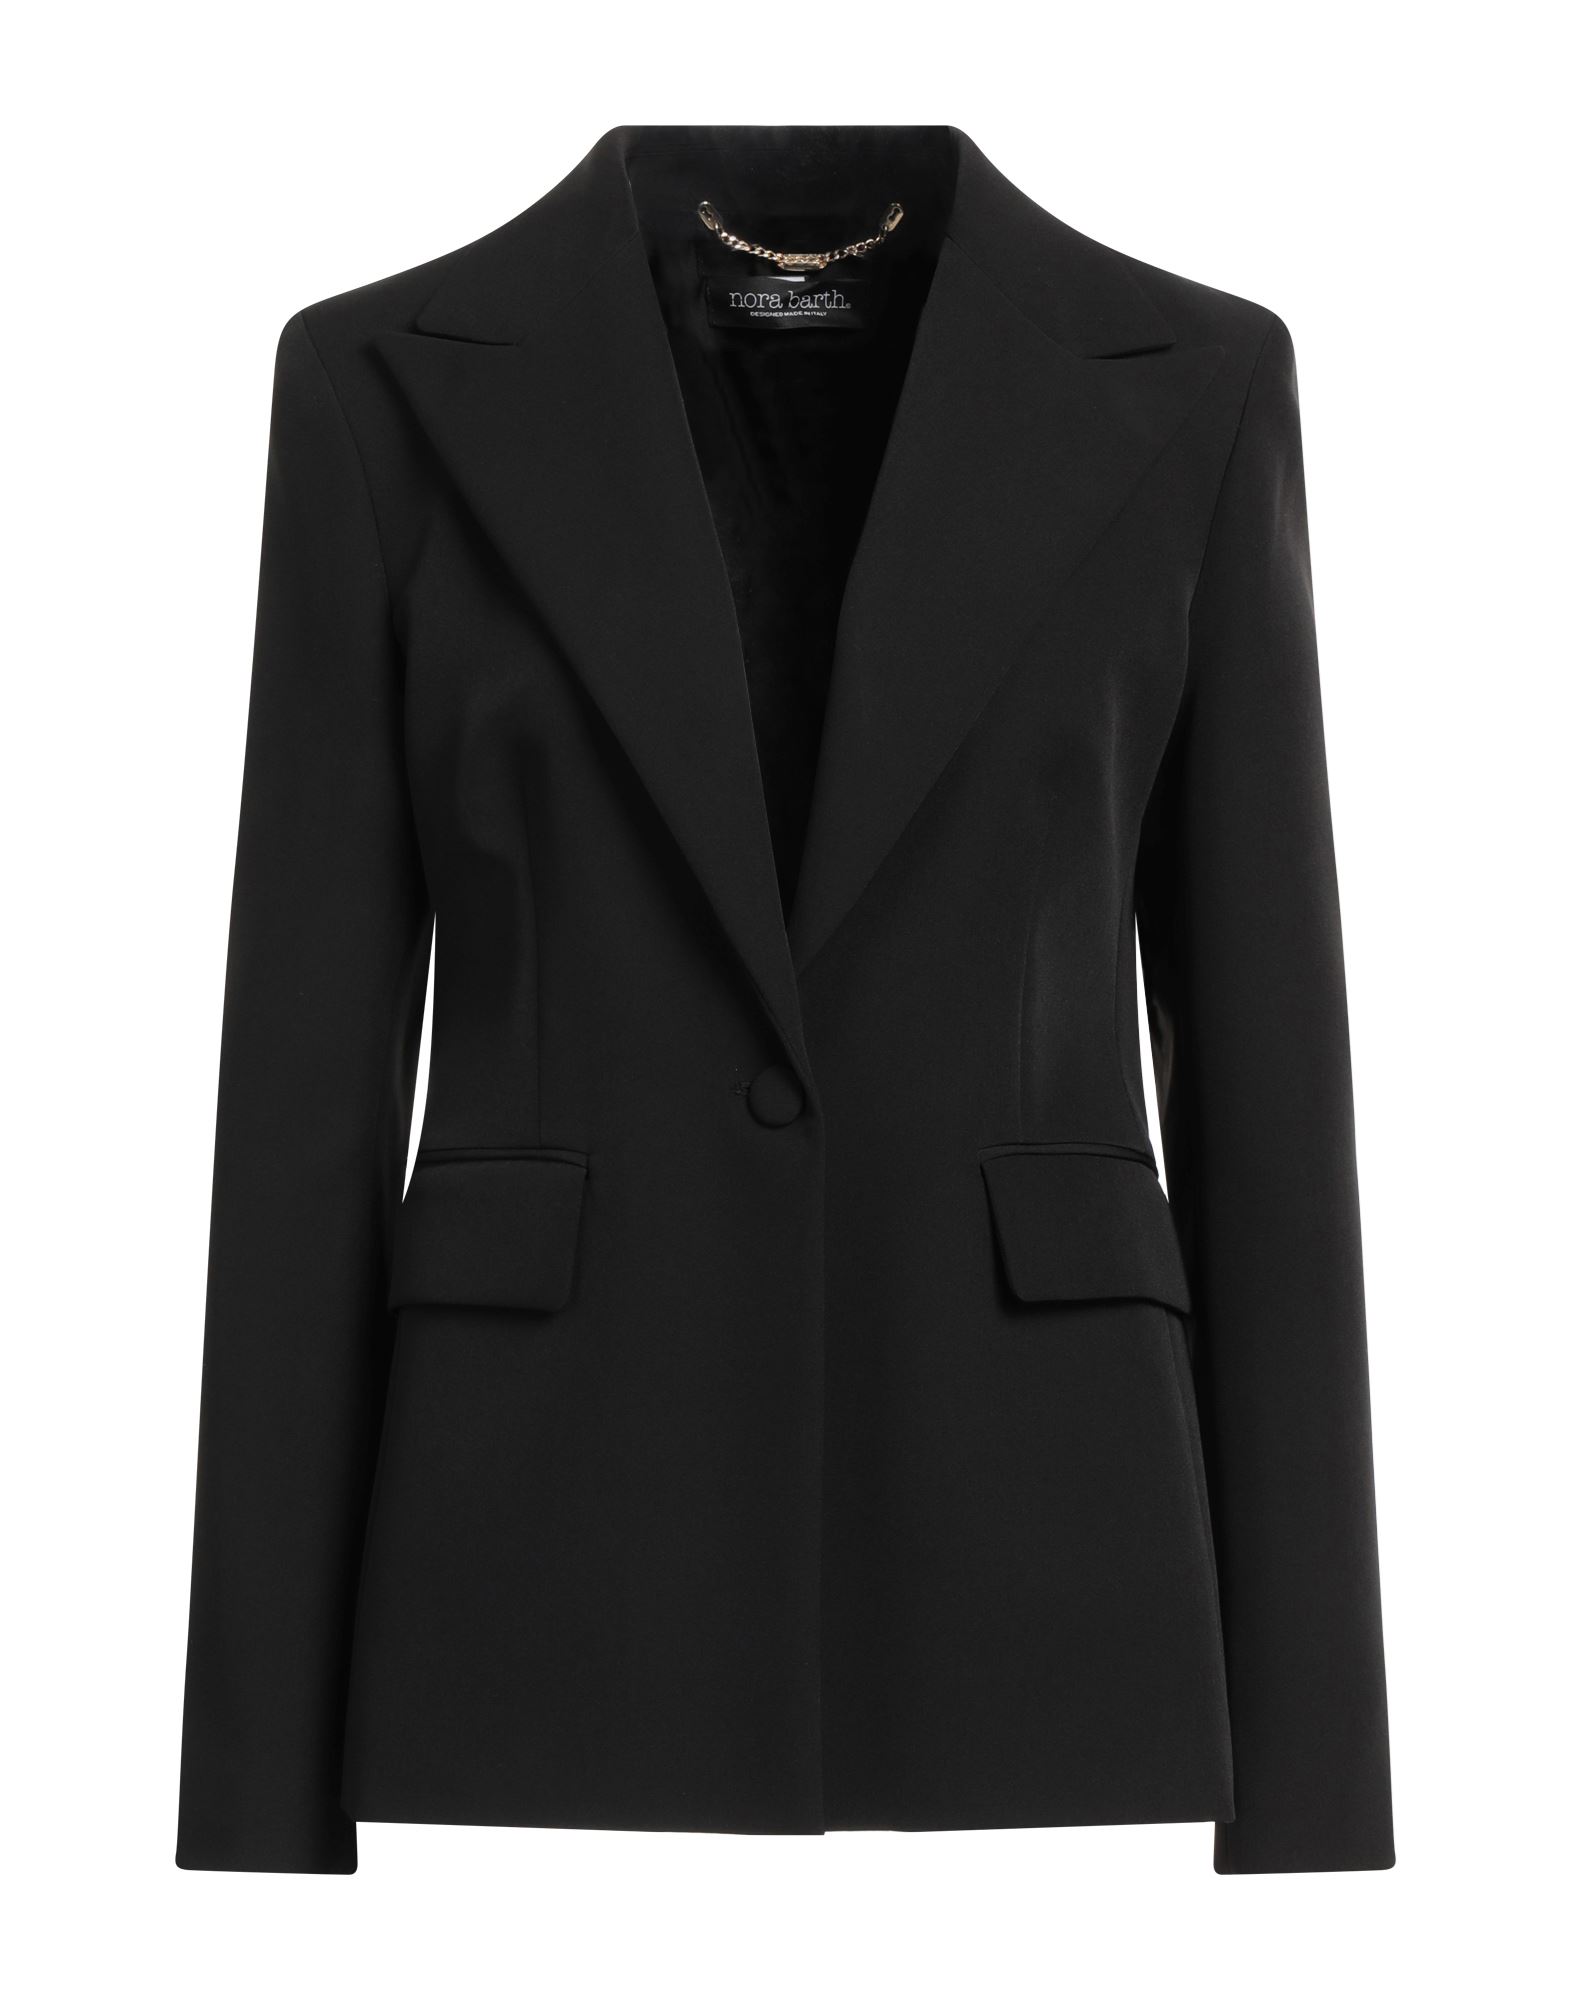 Nora Barth Suit Jackets In Black